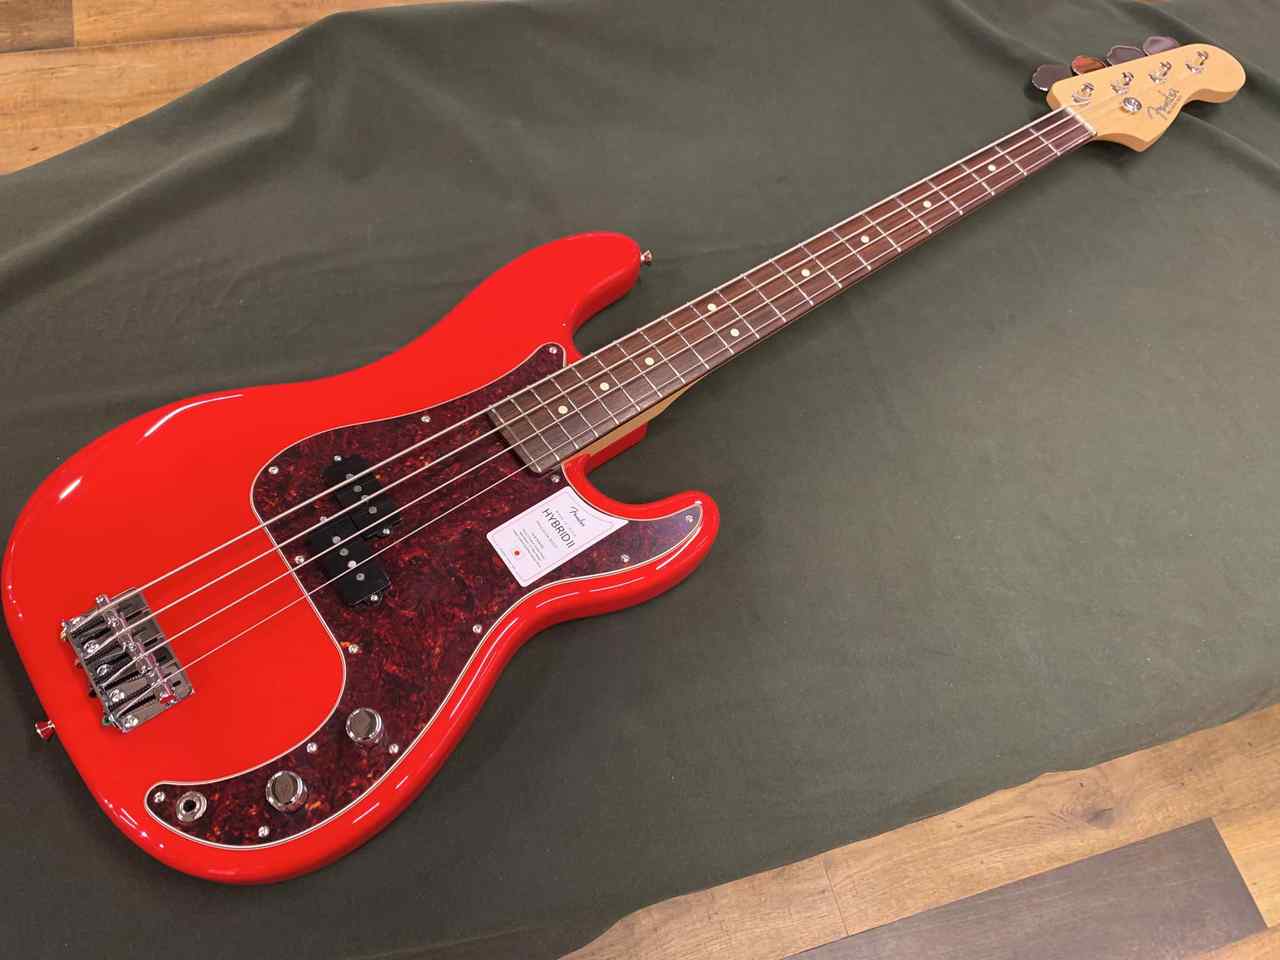 in　Red-　Japan　Bass　Hybrid　II　P　Modena　Fender(フェンダー)　Made